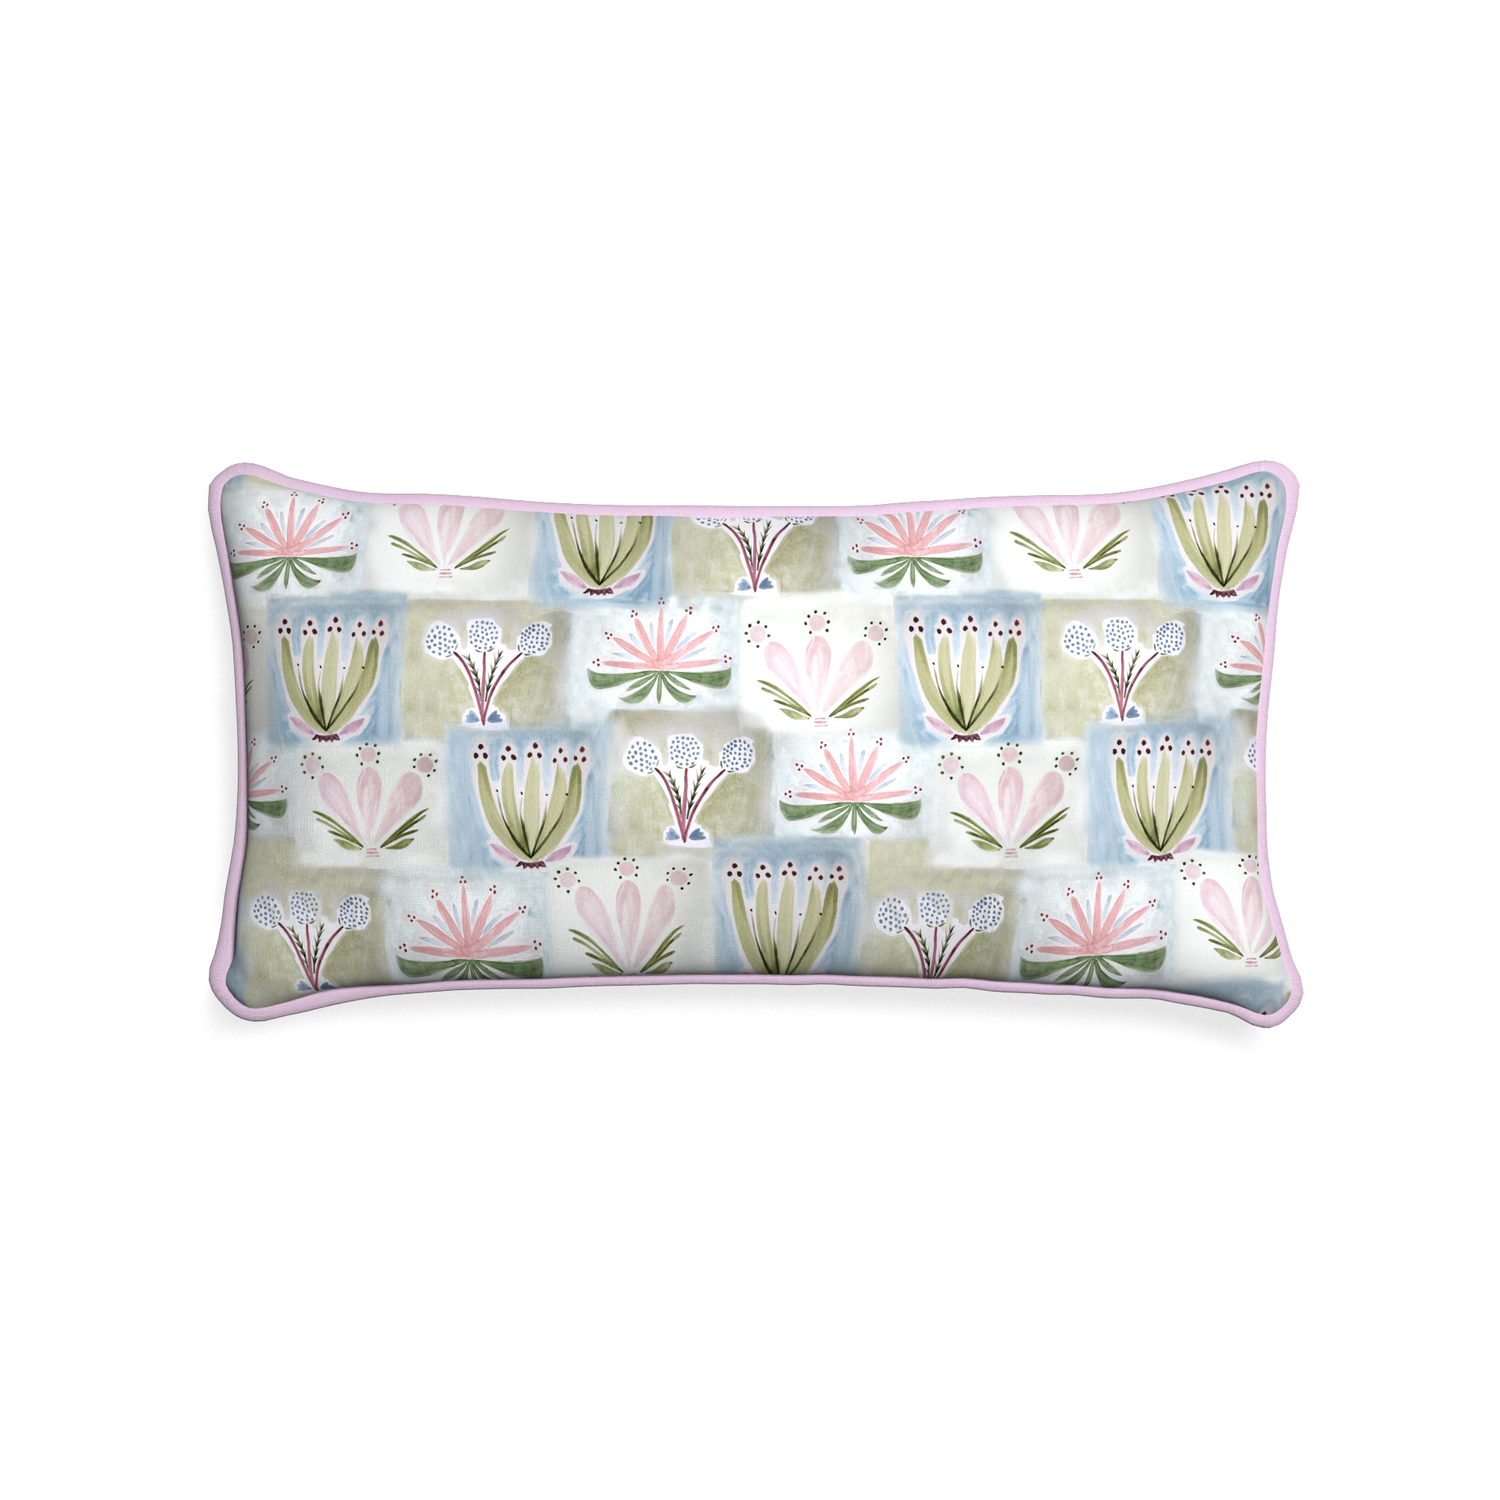 Midi-lumbar harper custom hand-painted floralpillow with l piping on white background